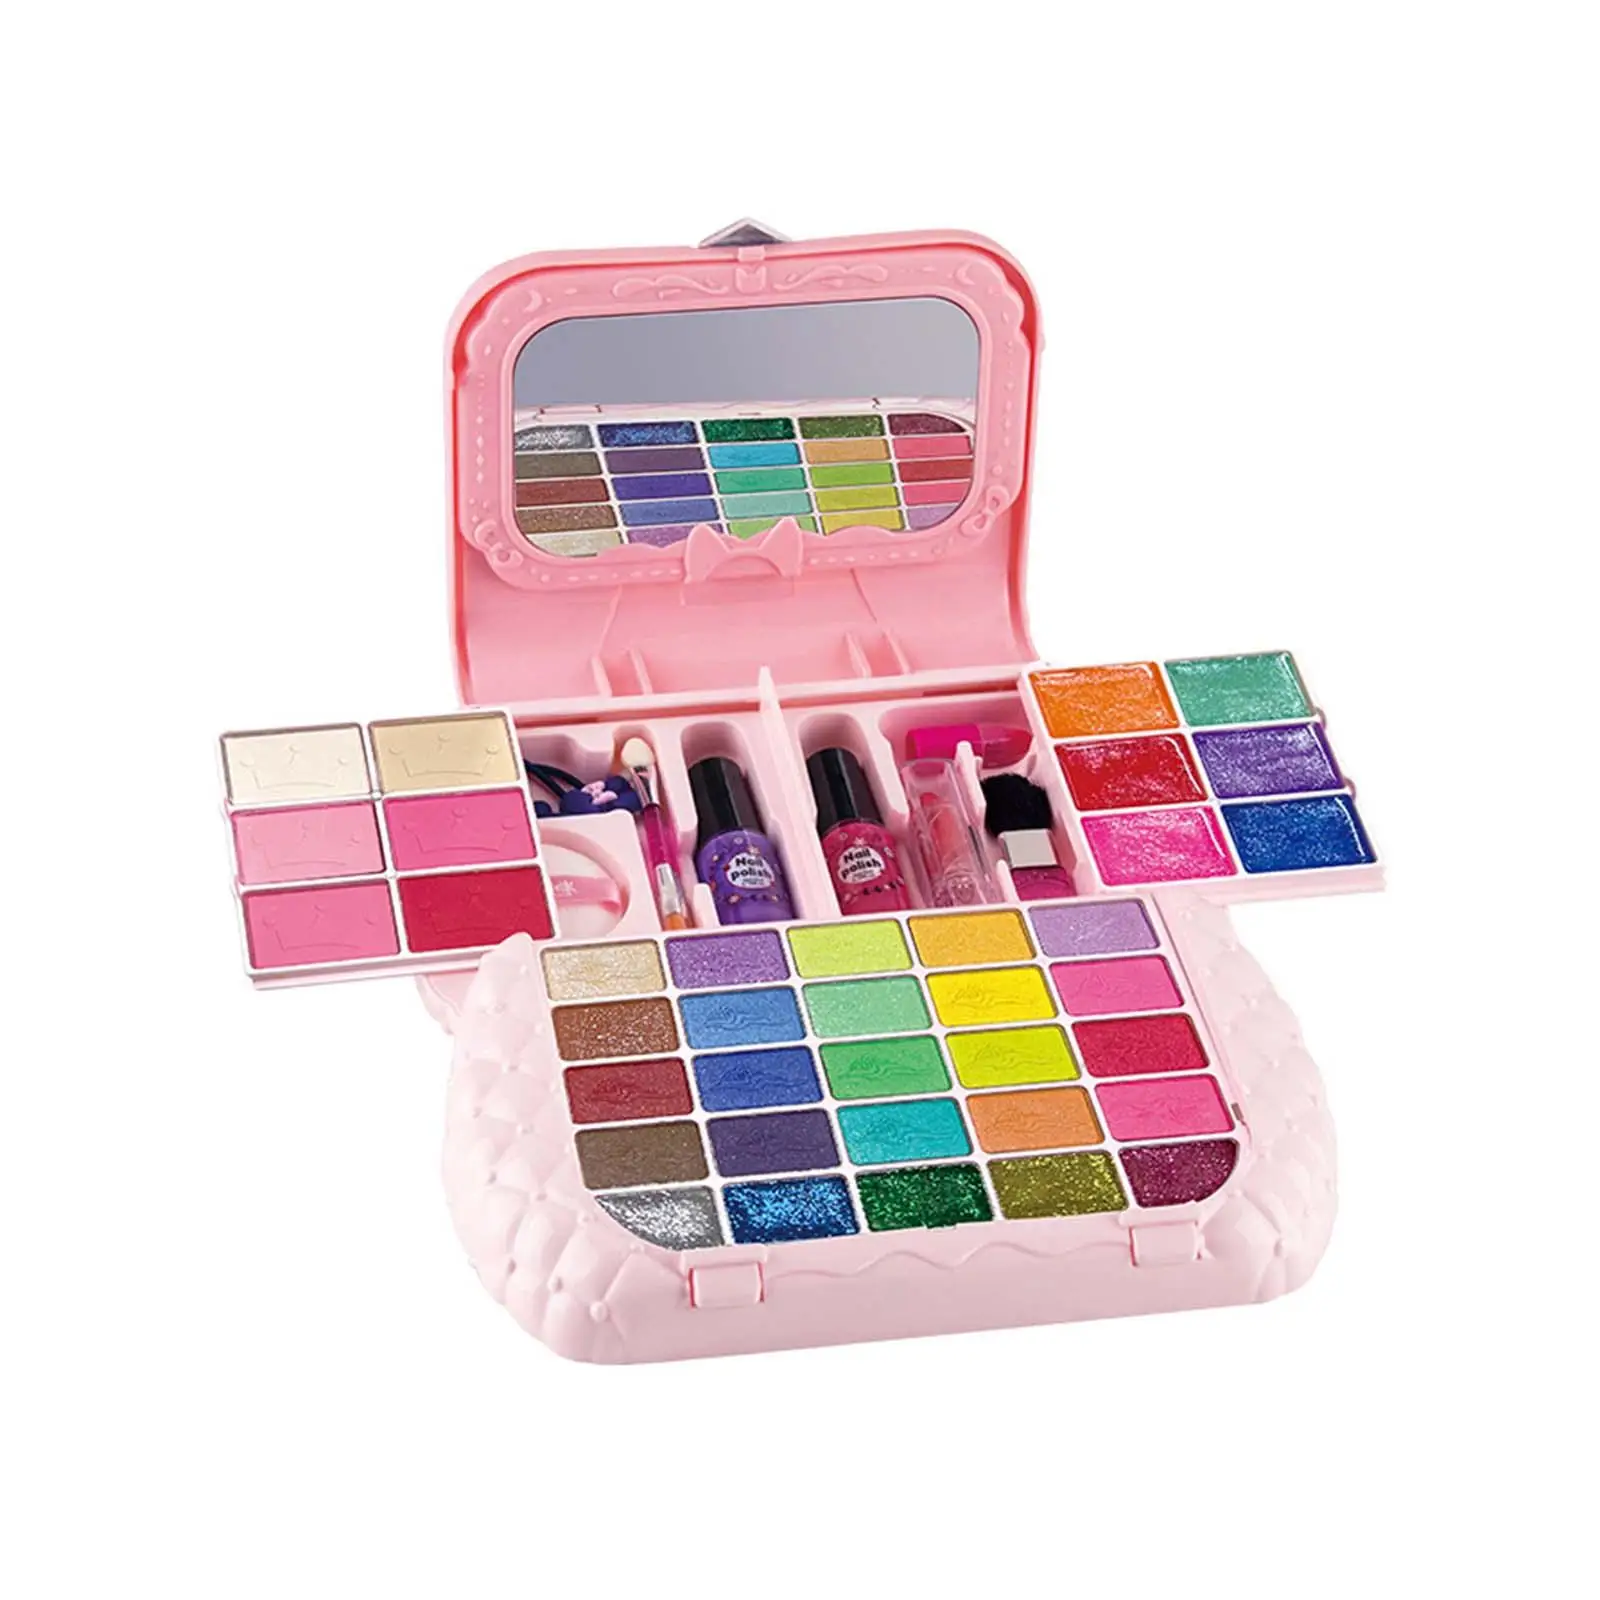 Kids Makeup Kits with Cosmetic Case Pretend Makeup Kits Role Play Games for Children